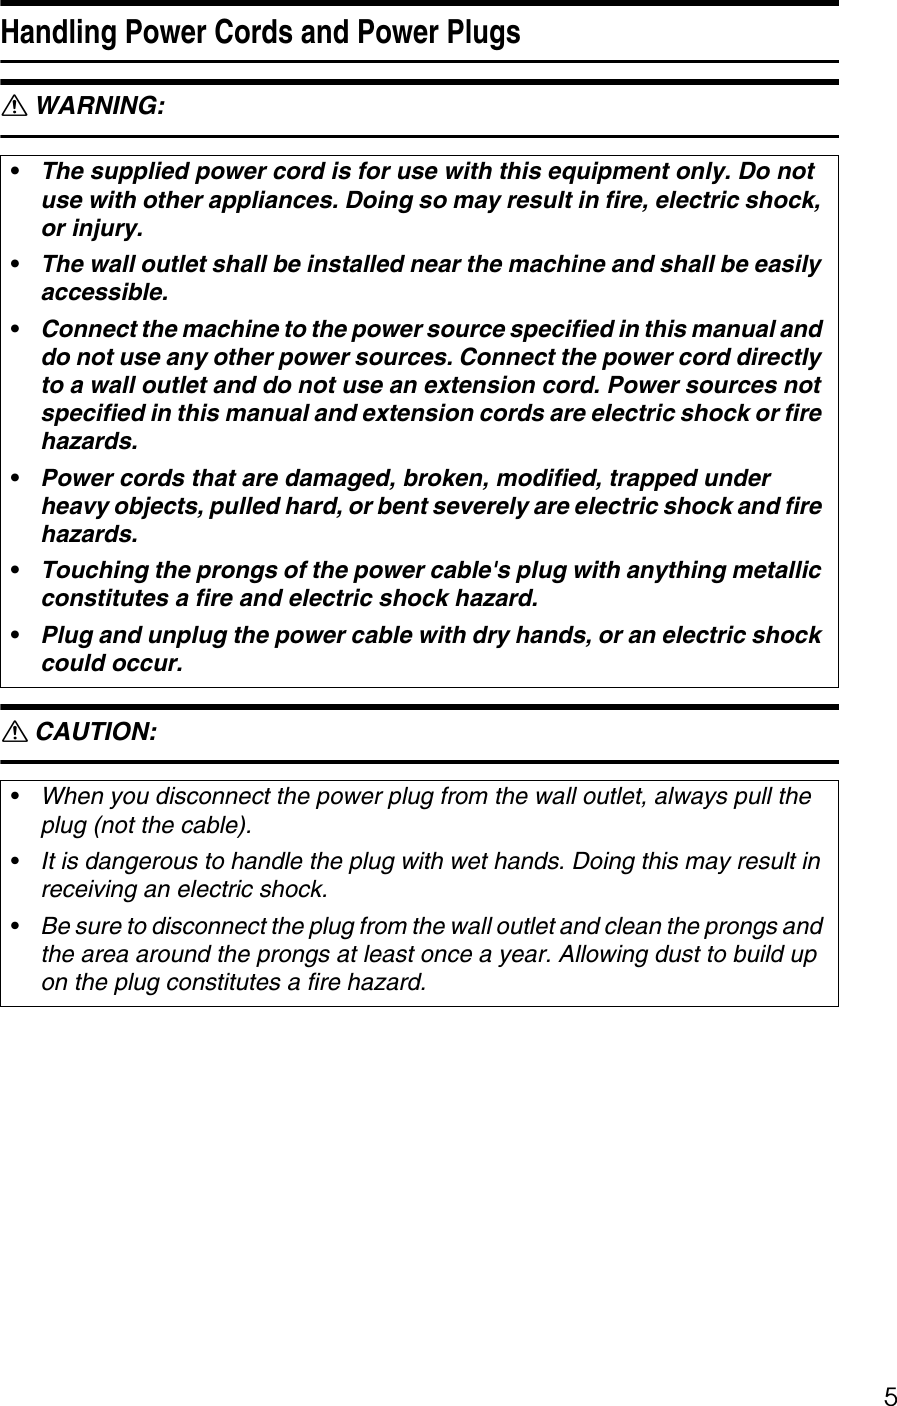 5Handling Power Cords and Power PlugsR WARNING: R CAUTION: •The supplied power cord is for use with this equipment only. Do not use with other appliances. Doing so may result in fire, electric shock, or injury.•The wall outlet shall be installed near the machine and shall be easily accessible.•Connect the machine to the power source specified in this manual and do not use any other power sources. Connect the power cord directly to a wall outlet and do not use an extension cord. Power sources not specified in this manual and extension cords are electric shock or fire hazards.•Power cords that are damaged, broken, modified, trapped under heavy objects, pulled hard, or bent severely are electric shock and fire hazards.•Touching the prongs of the power cable&apos;s plug with anything metallic constitutes a fire and electric shock hazard.•Plug and unplug the power cable with dry hands, or an electric shock could occur.•When you disconnect the power plug from the wall outlet, always pull the plug (not the cable).•It is dangerous to handle the plug with wet hands. Doing this may result in receiving an electric shock.•Be sure to disconnect the plug from the wall outlet and clean the prongs and the area around the prongs at least once a year. Allowing dust to build up on the plug constitutes a fire hazard.